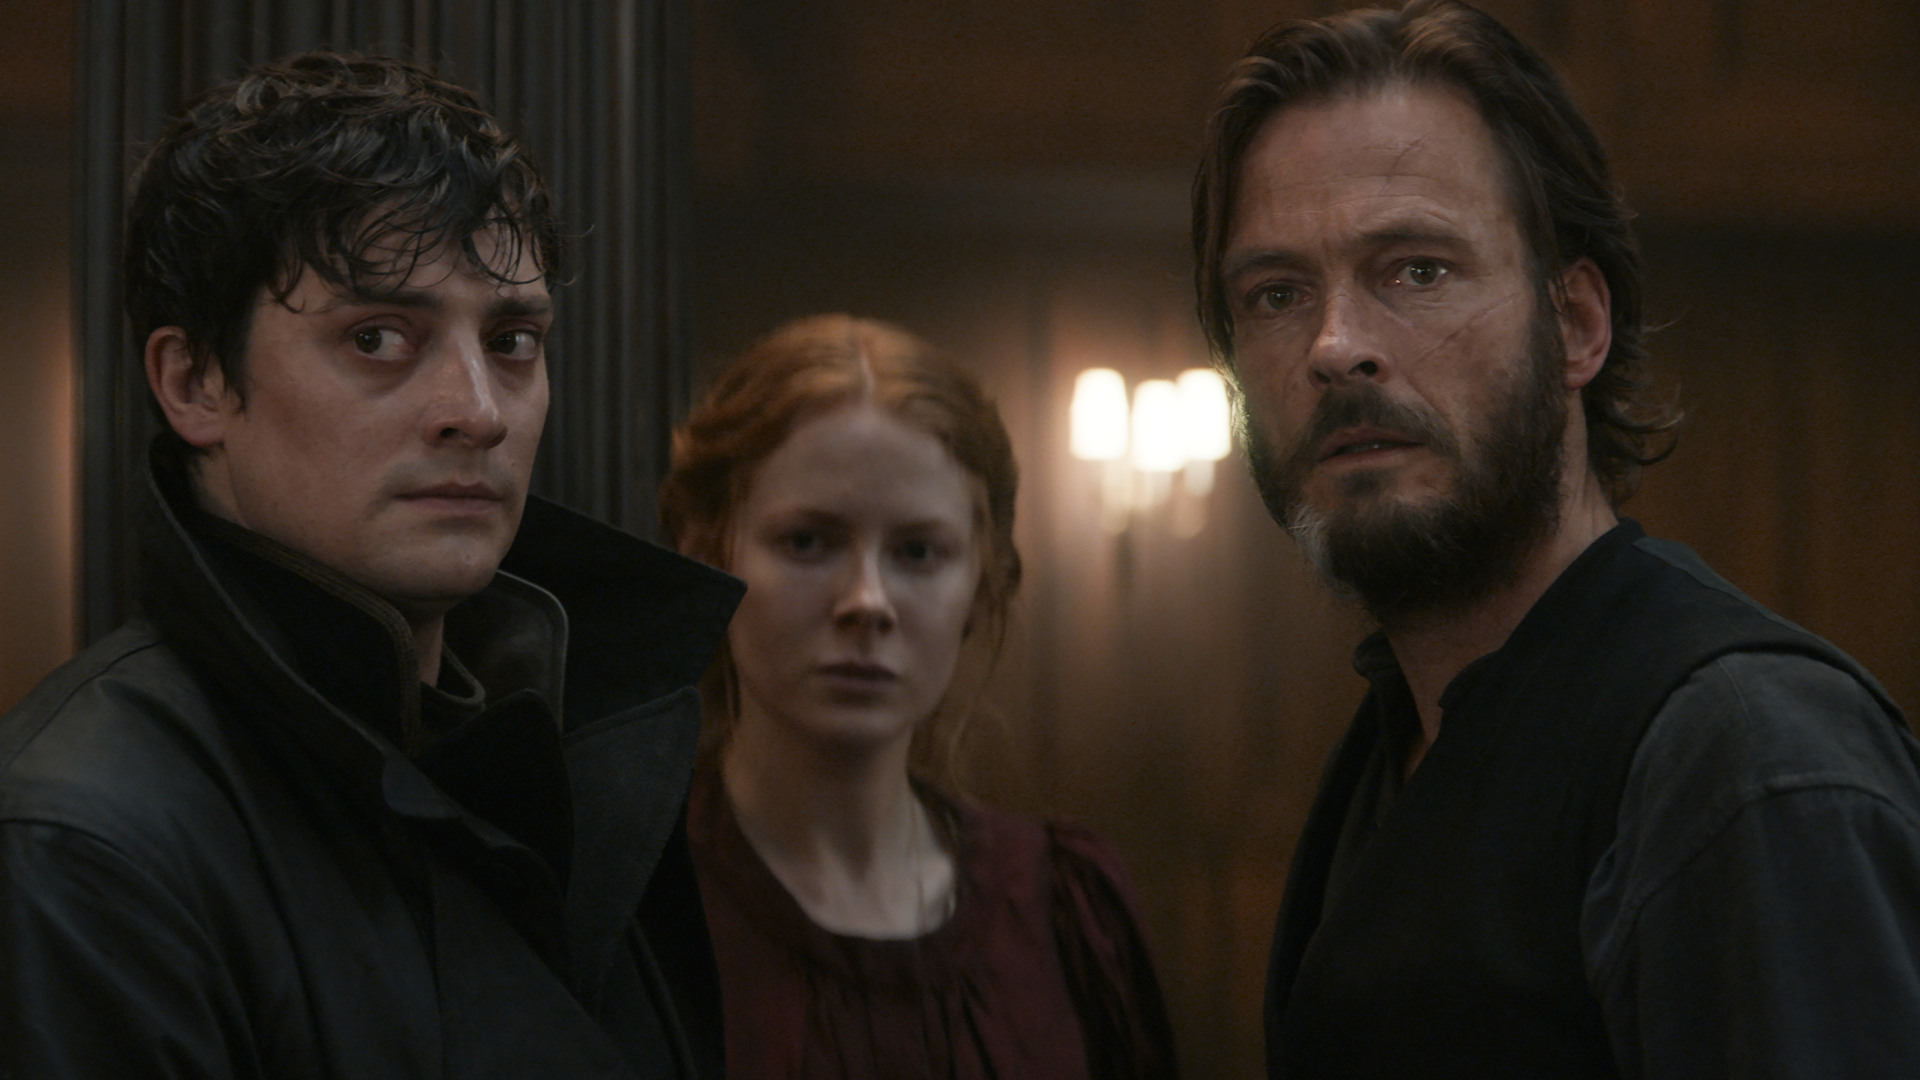 1899 creators address season 2 plans – and how they want Netflix show to end